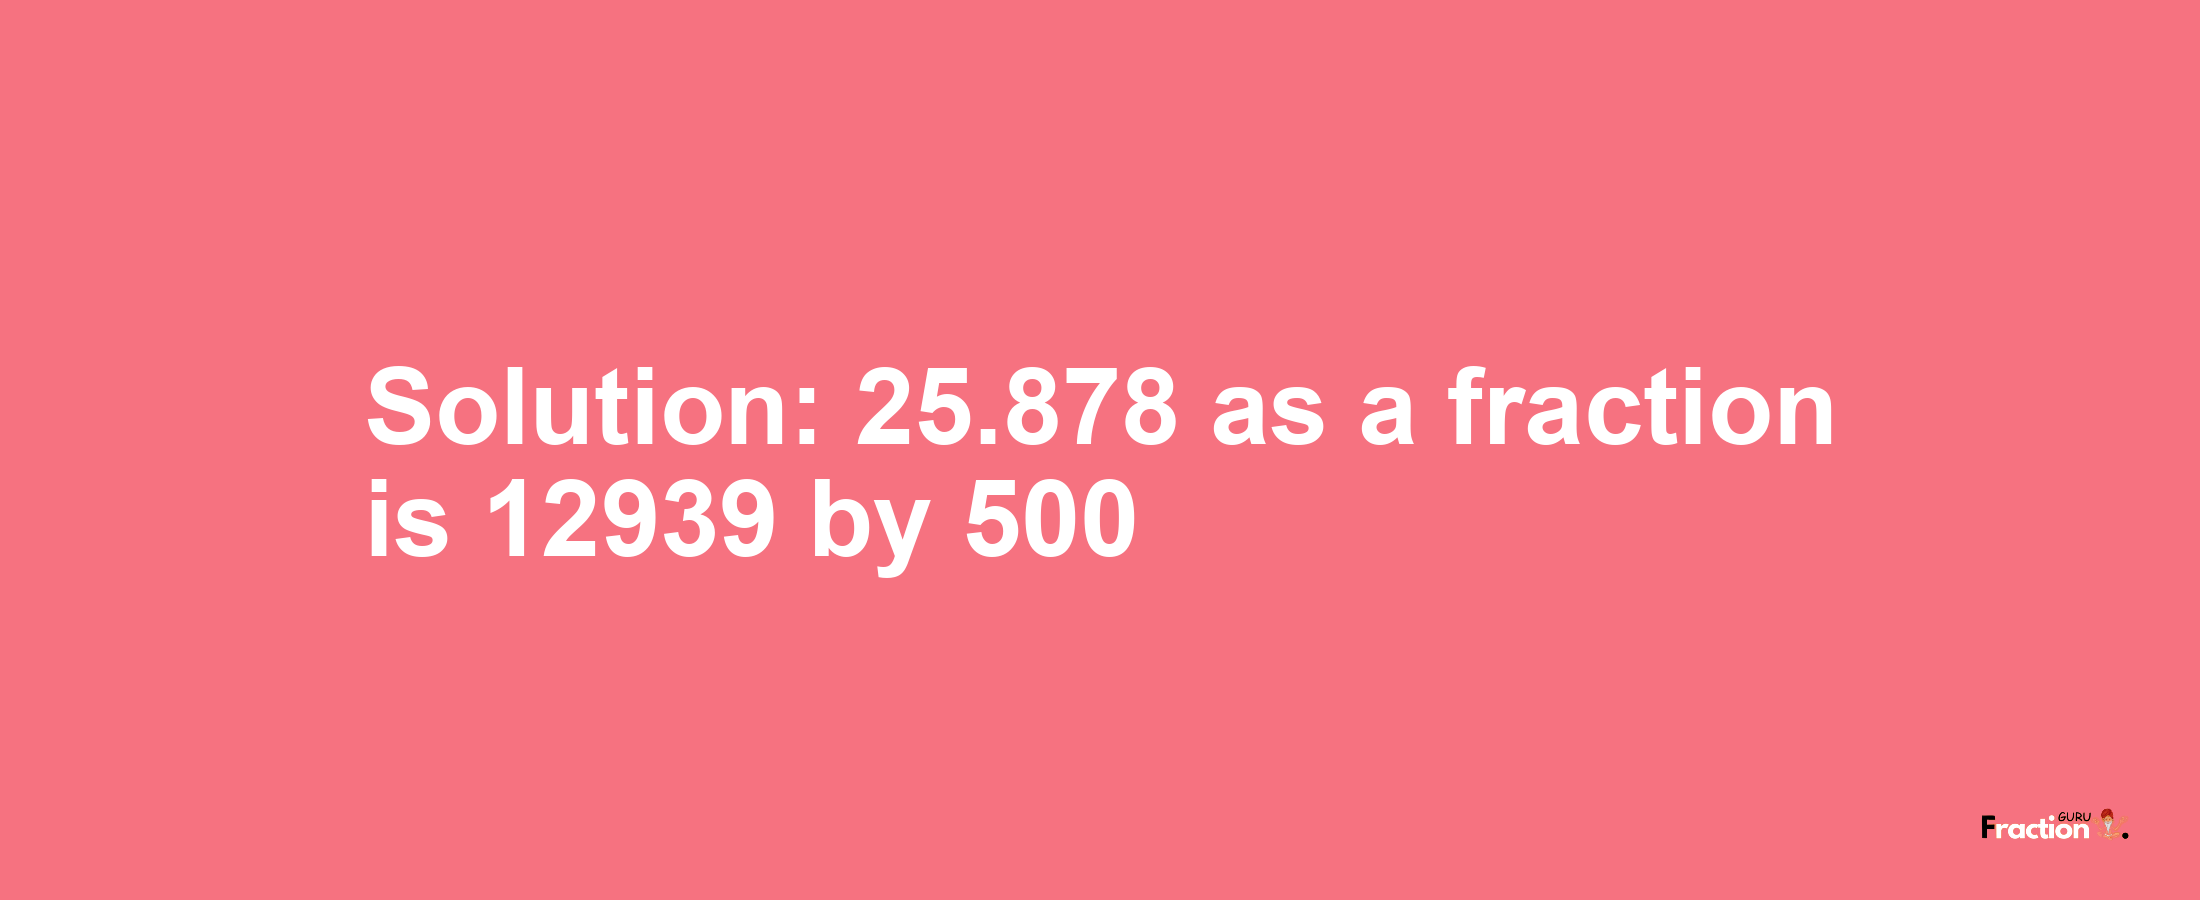 Solution:25.878 as a fraction is 12939/500